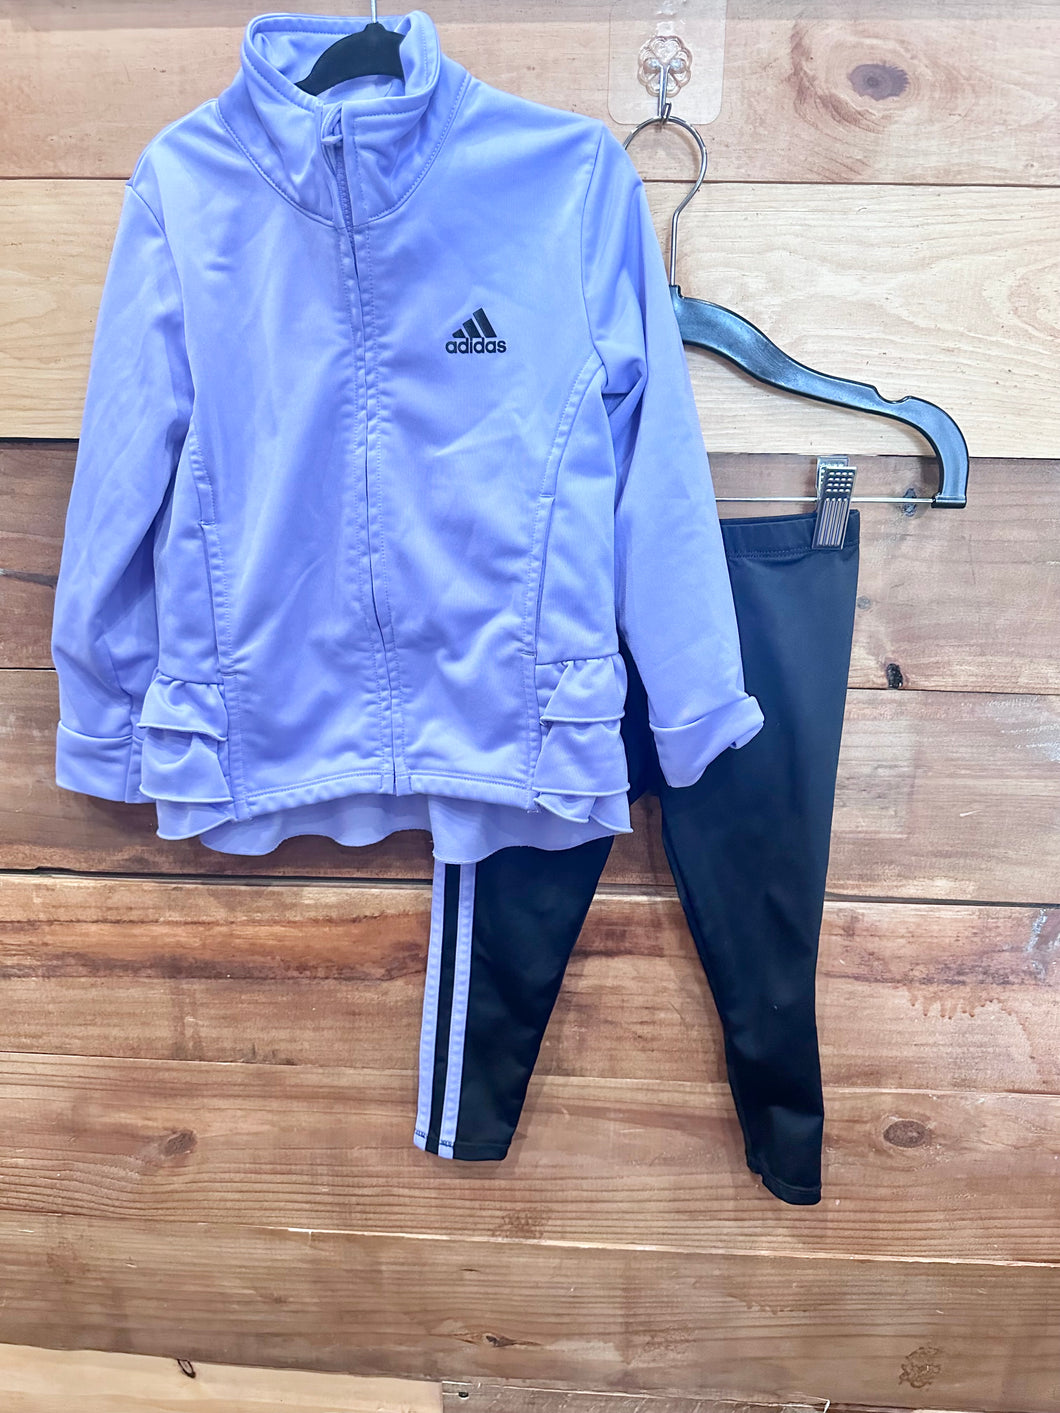 Adidas Purple 2pc Outfit Size 3T